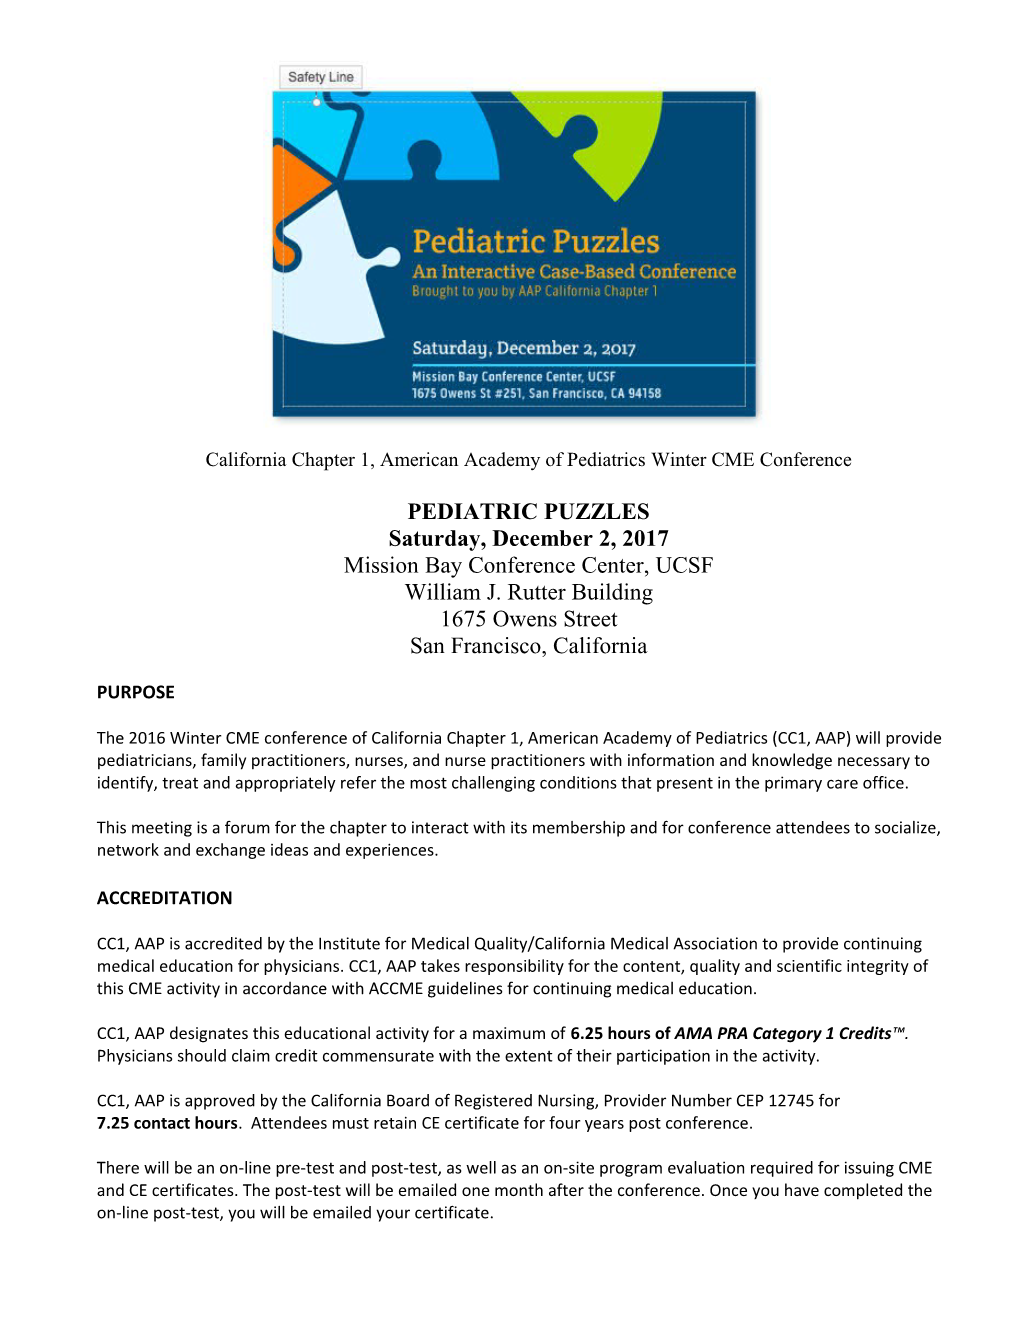 California Chapter 1, American Academy of Pediatrics Winter CME Conference